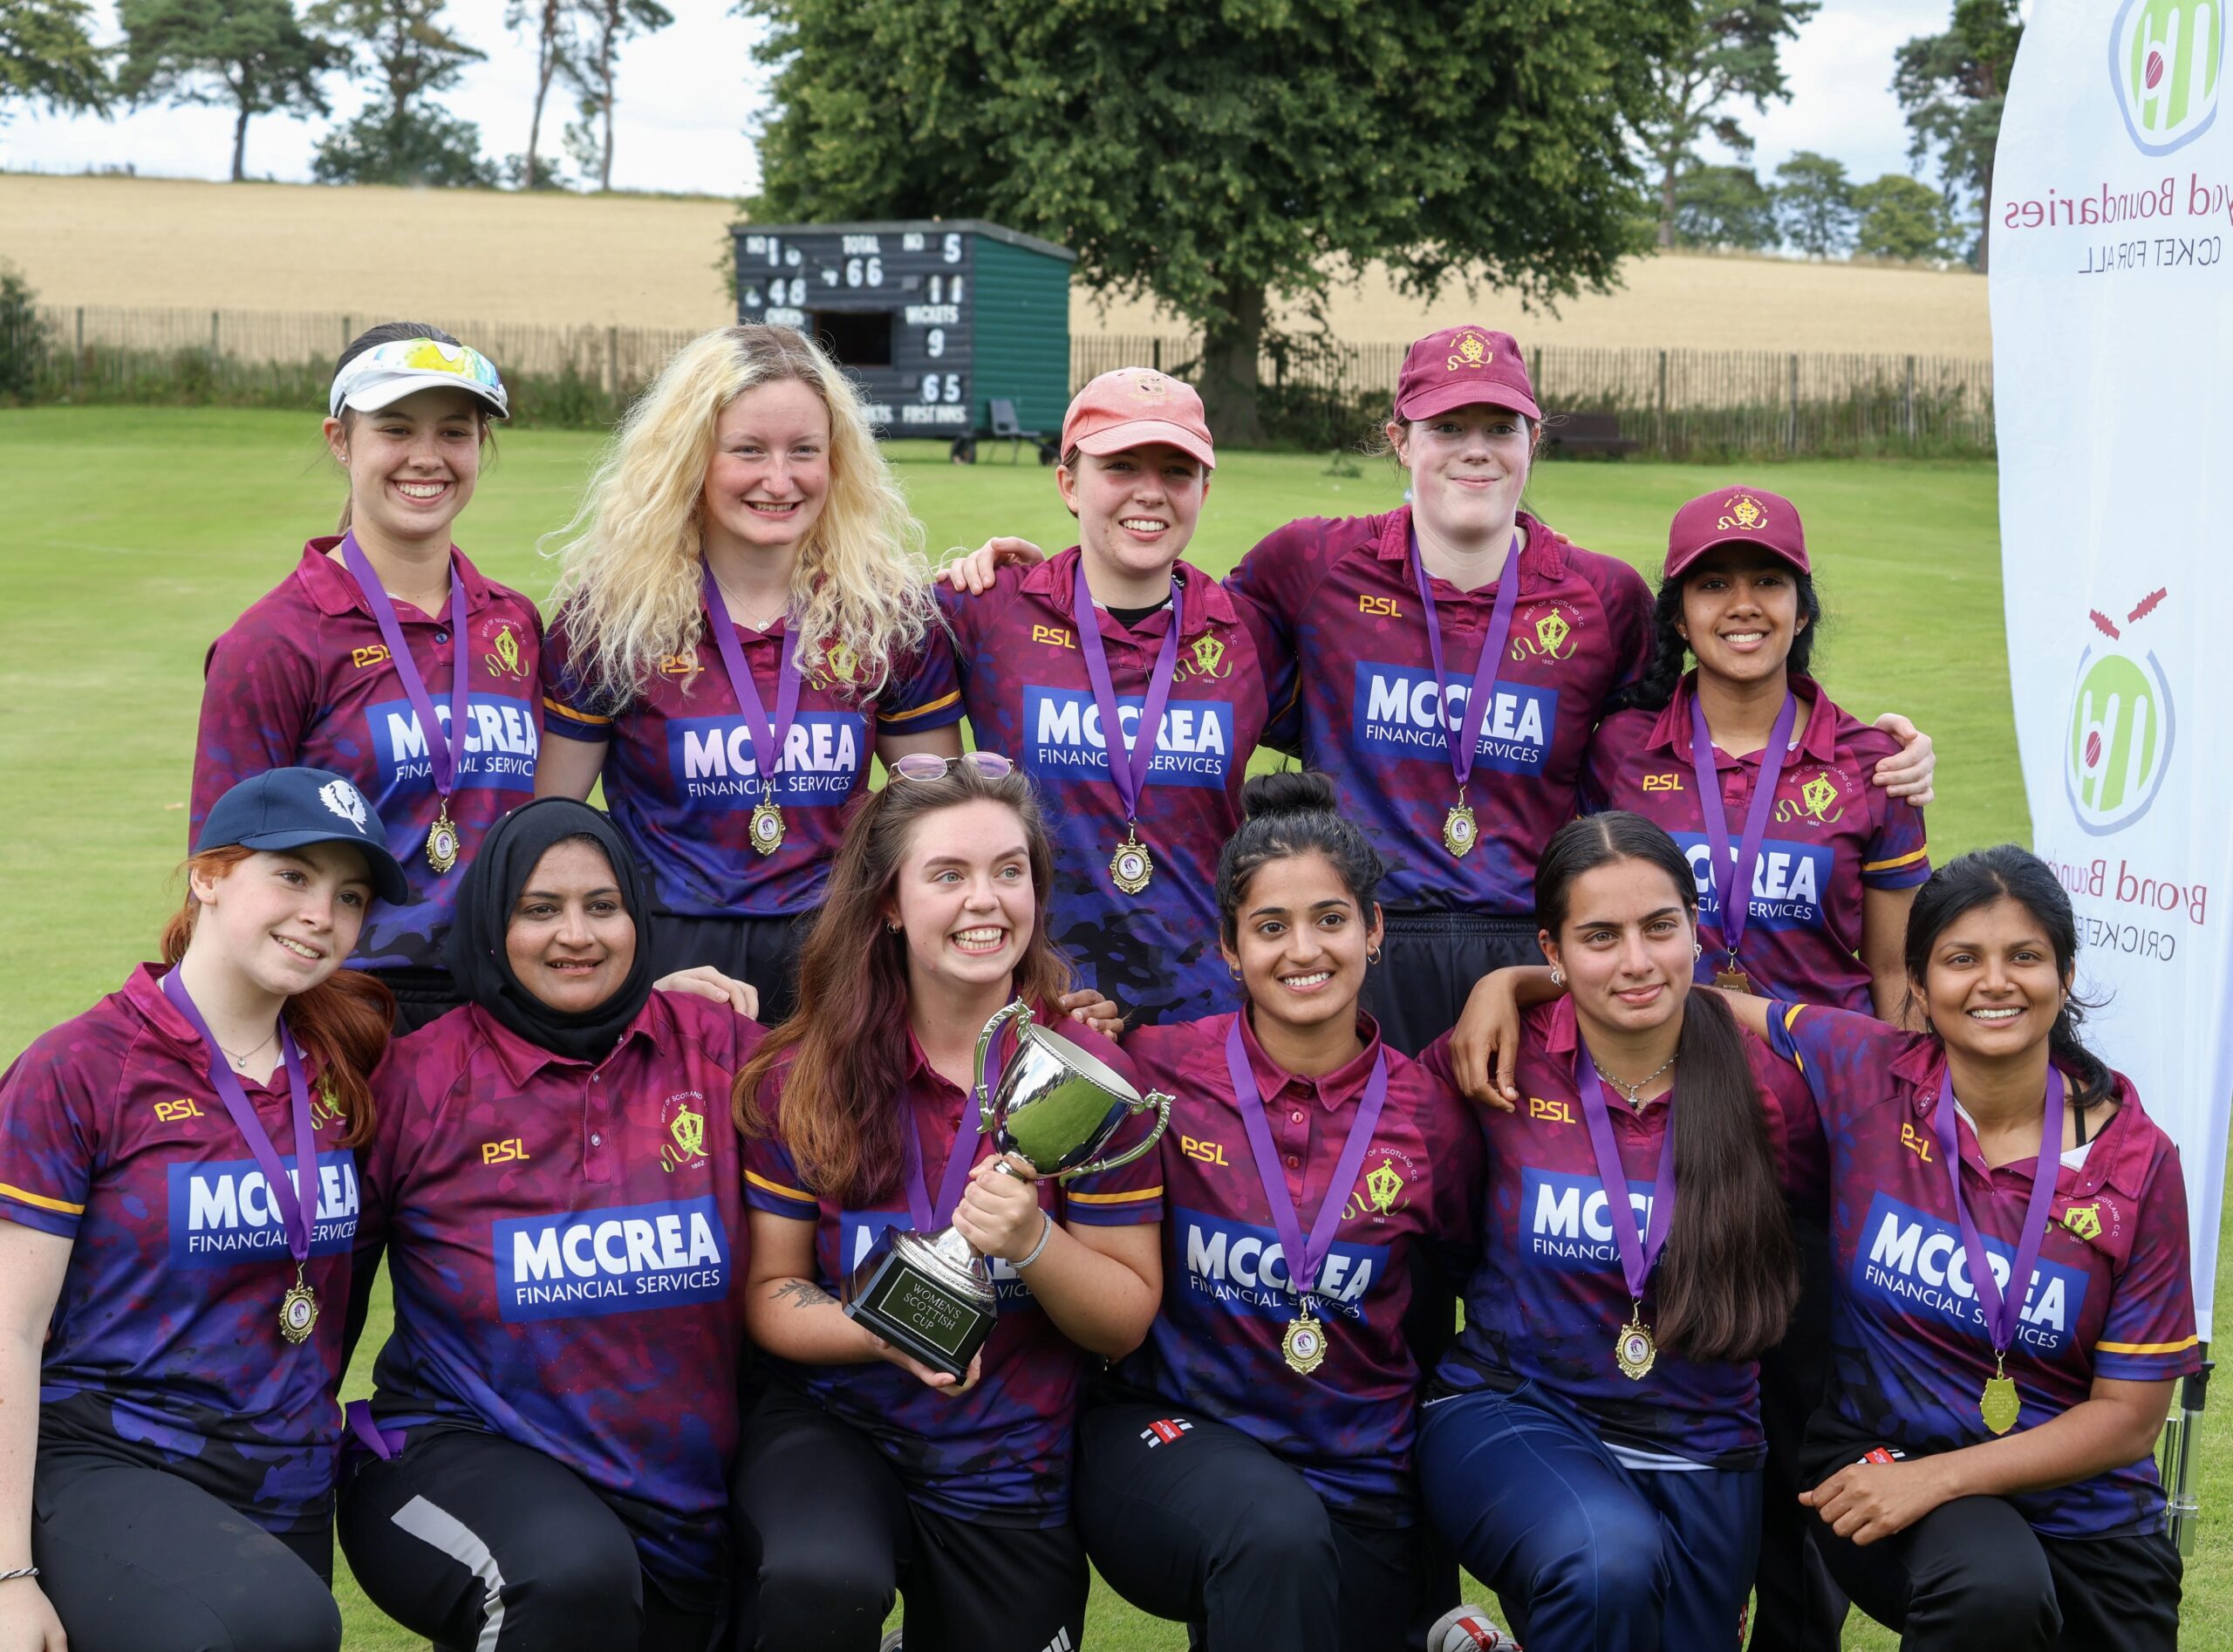 WEST OF SCOTLAND WIN FIRST WOMEN’S T20 SCOTTISH CUP TITLE IN STYLE